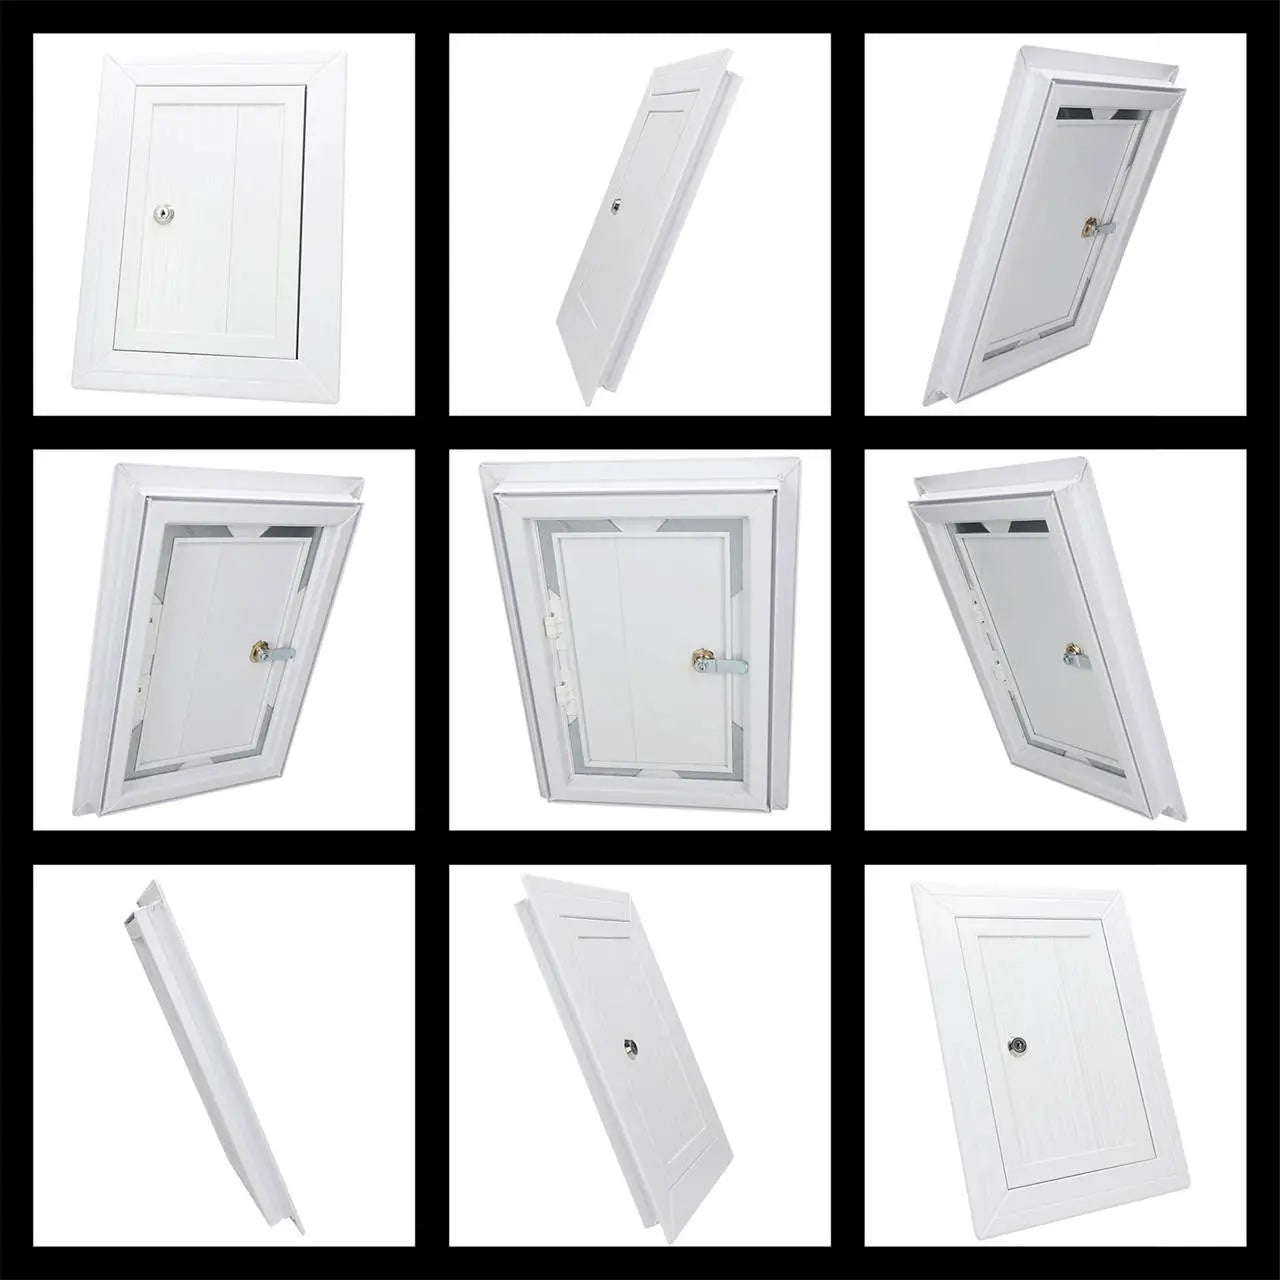 White PVC Cover Inspection Hatch Door Access Panel Key Lock Inspection Access Panels